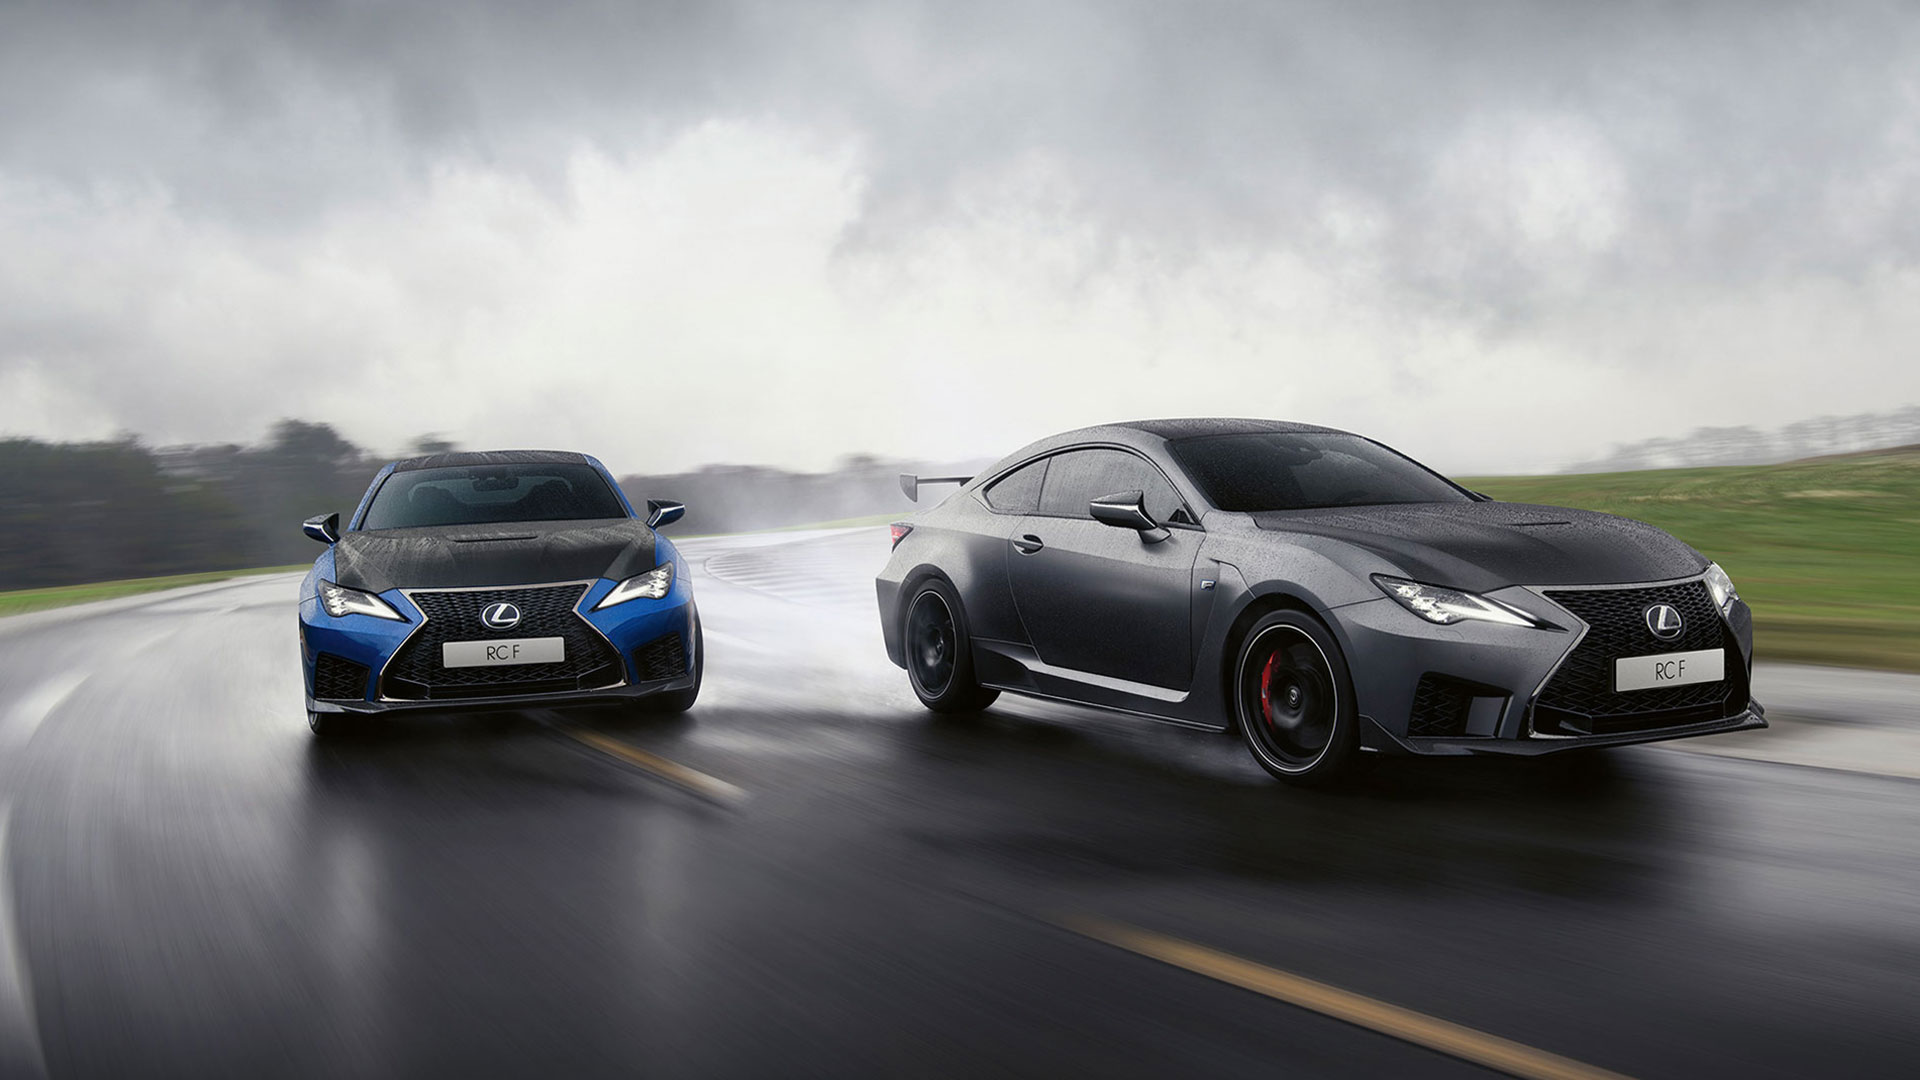 Two Lexus RC F's on a race track 